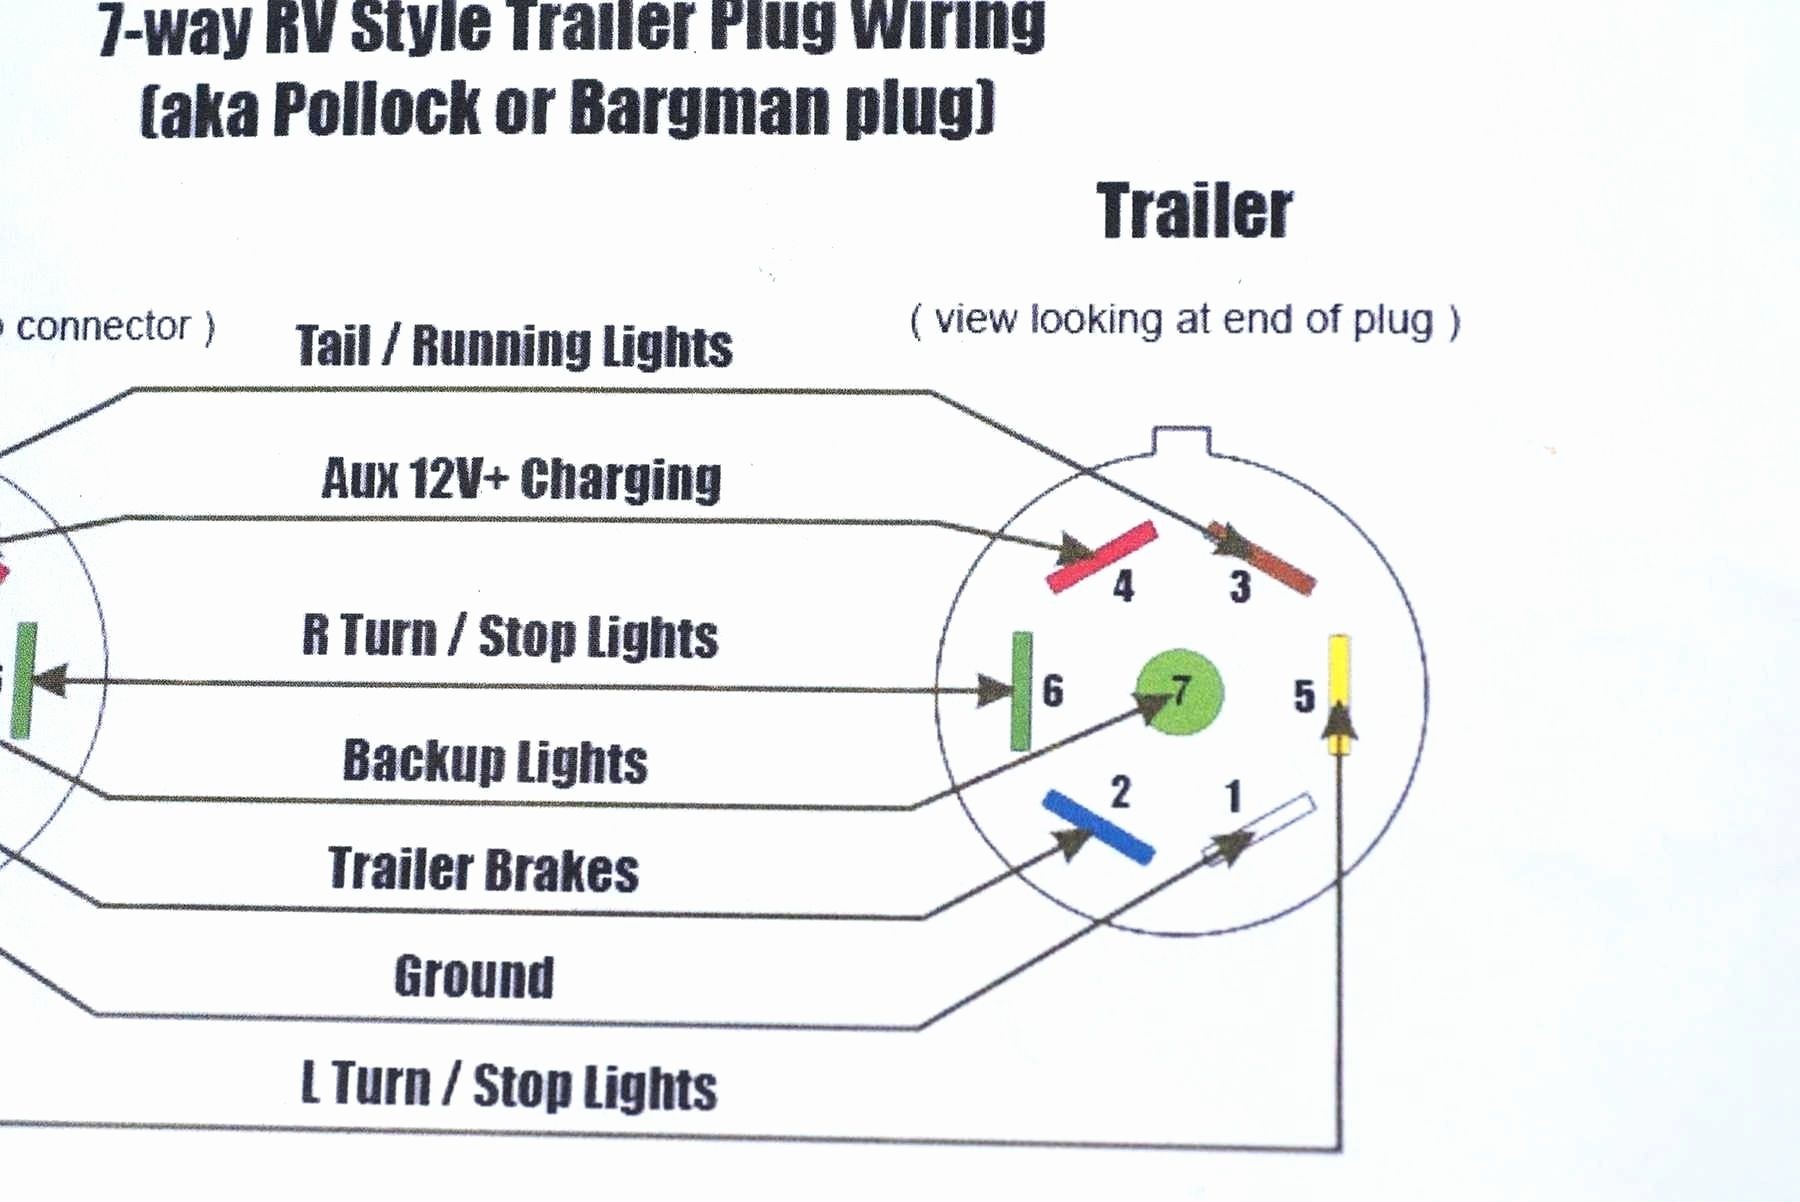 Ford Truck Trailer Plug Wiring Diagram 60 Lovely Wiring Diagram for Gmc Trailer Plug Of Ford Truck Trailer Plug Wiring Diagram